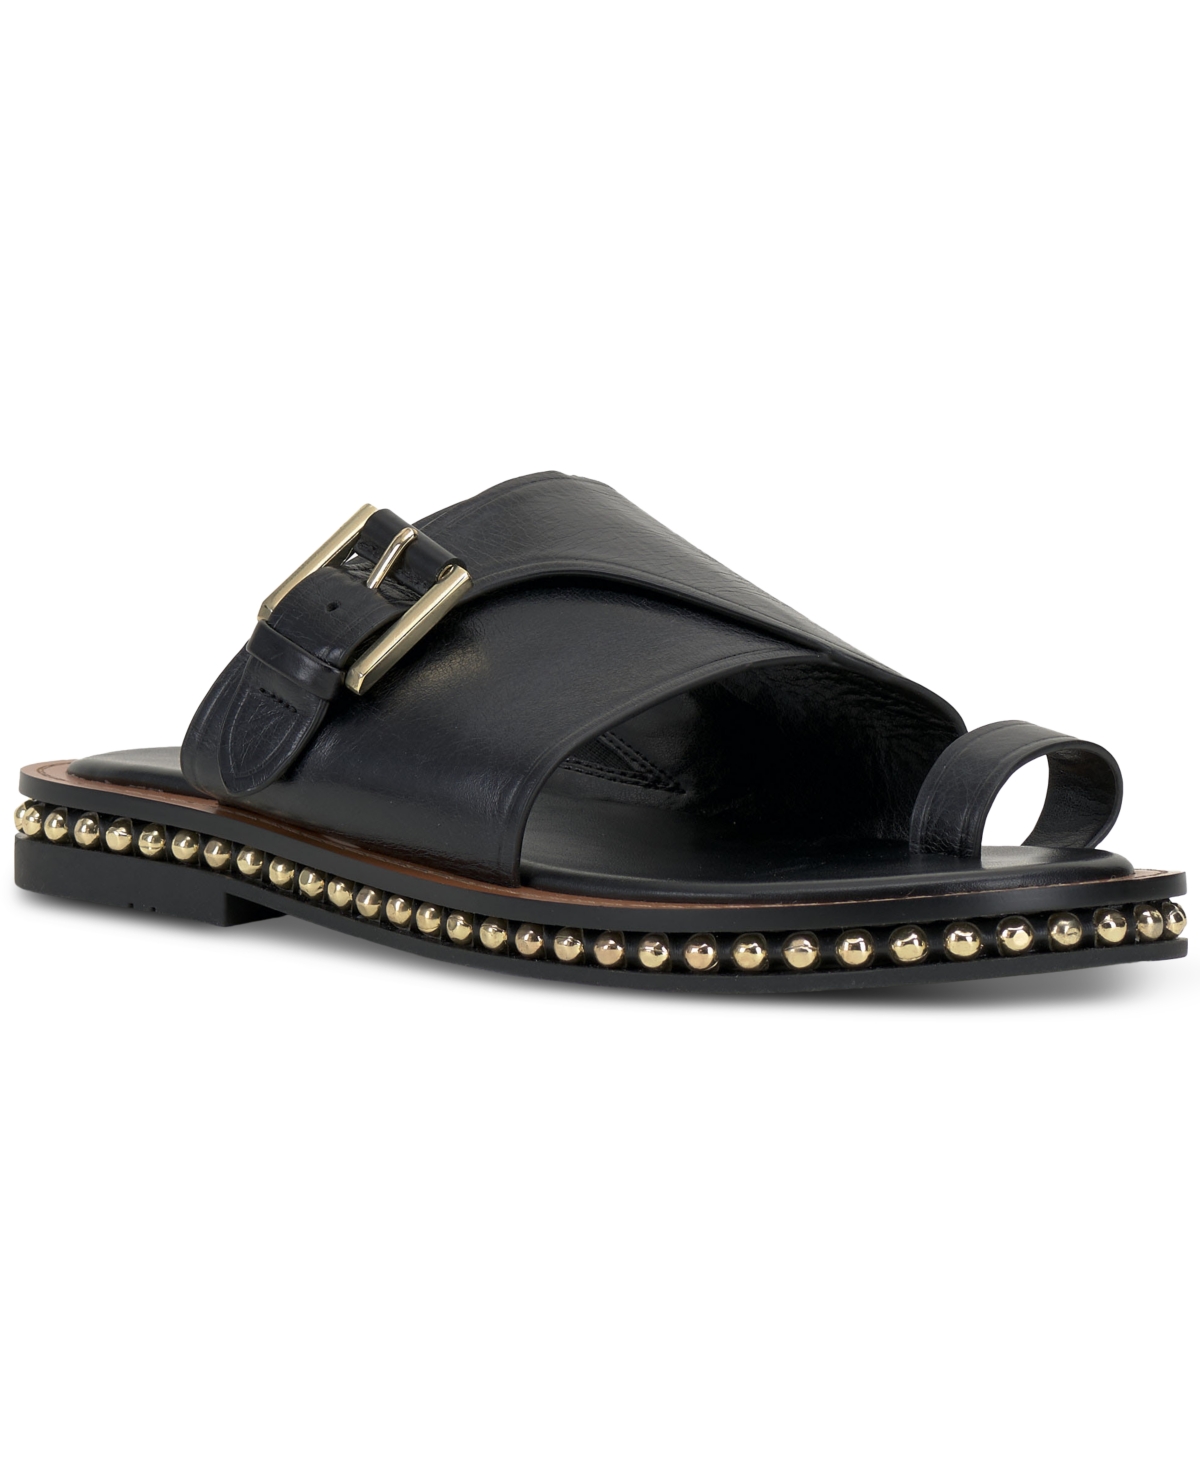 UPC 196672387393 product image for Vince Camuto Women's Cooliann Hooded Thong Flat Sandals Women's Shoes | upcitemdb.com